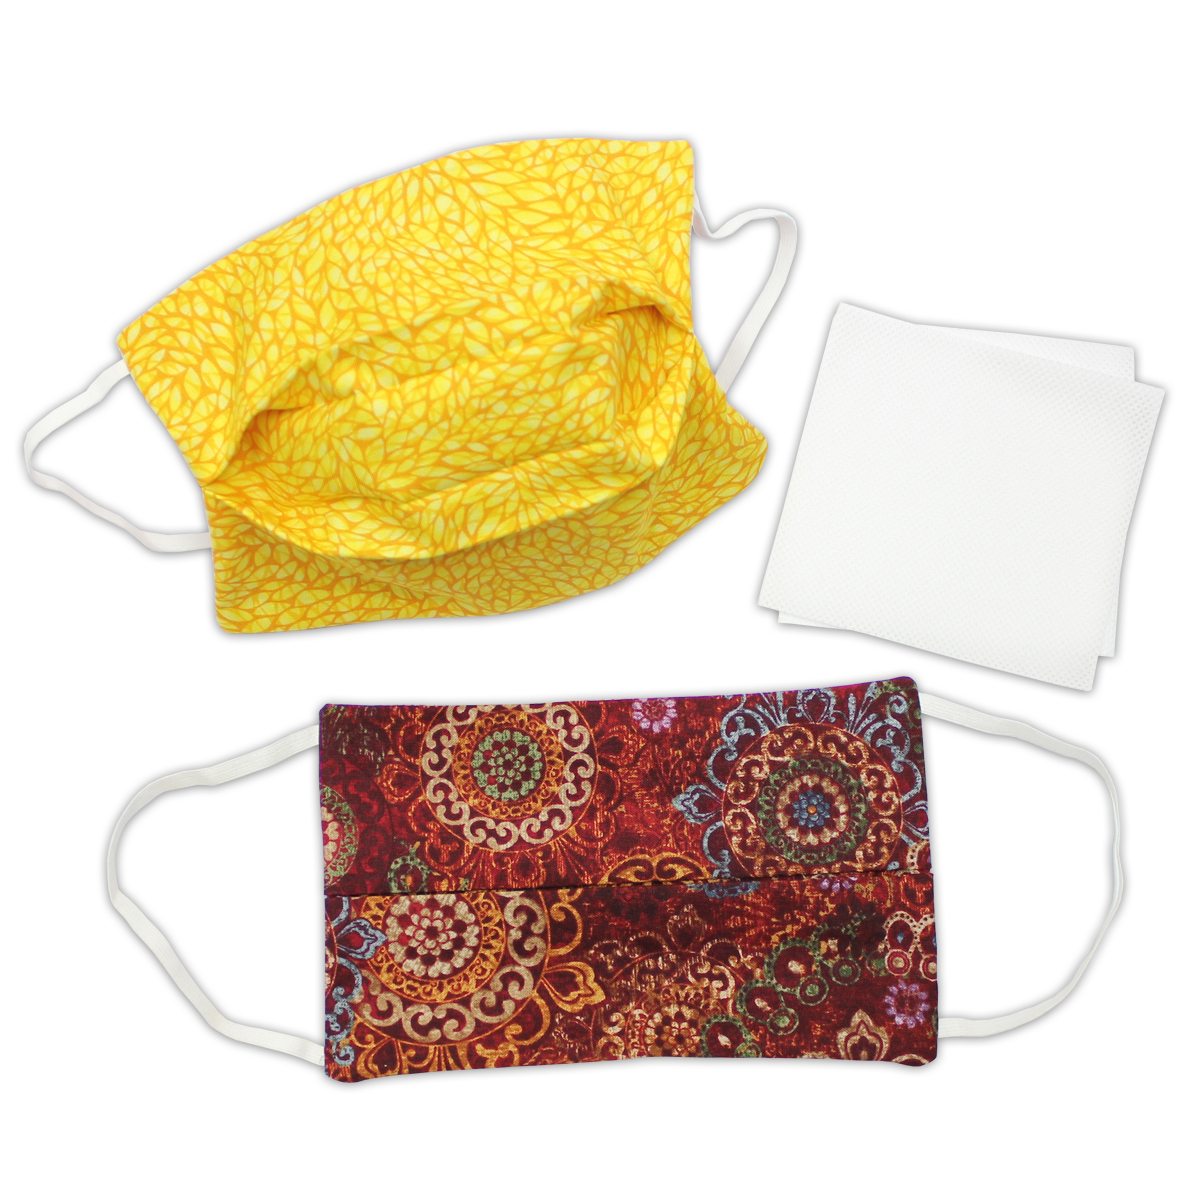 Sew Your Own Reusable Face Mask Kit, Set of 4 with Assorted Fabrics - image 5 of 13